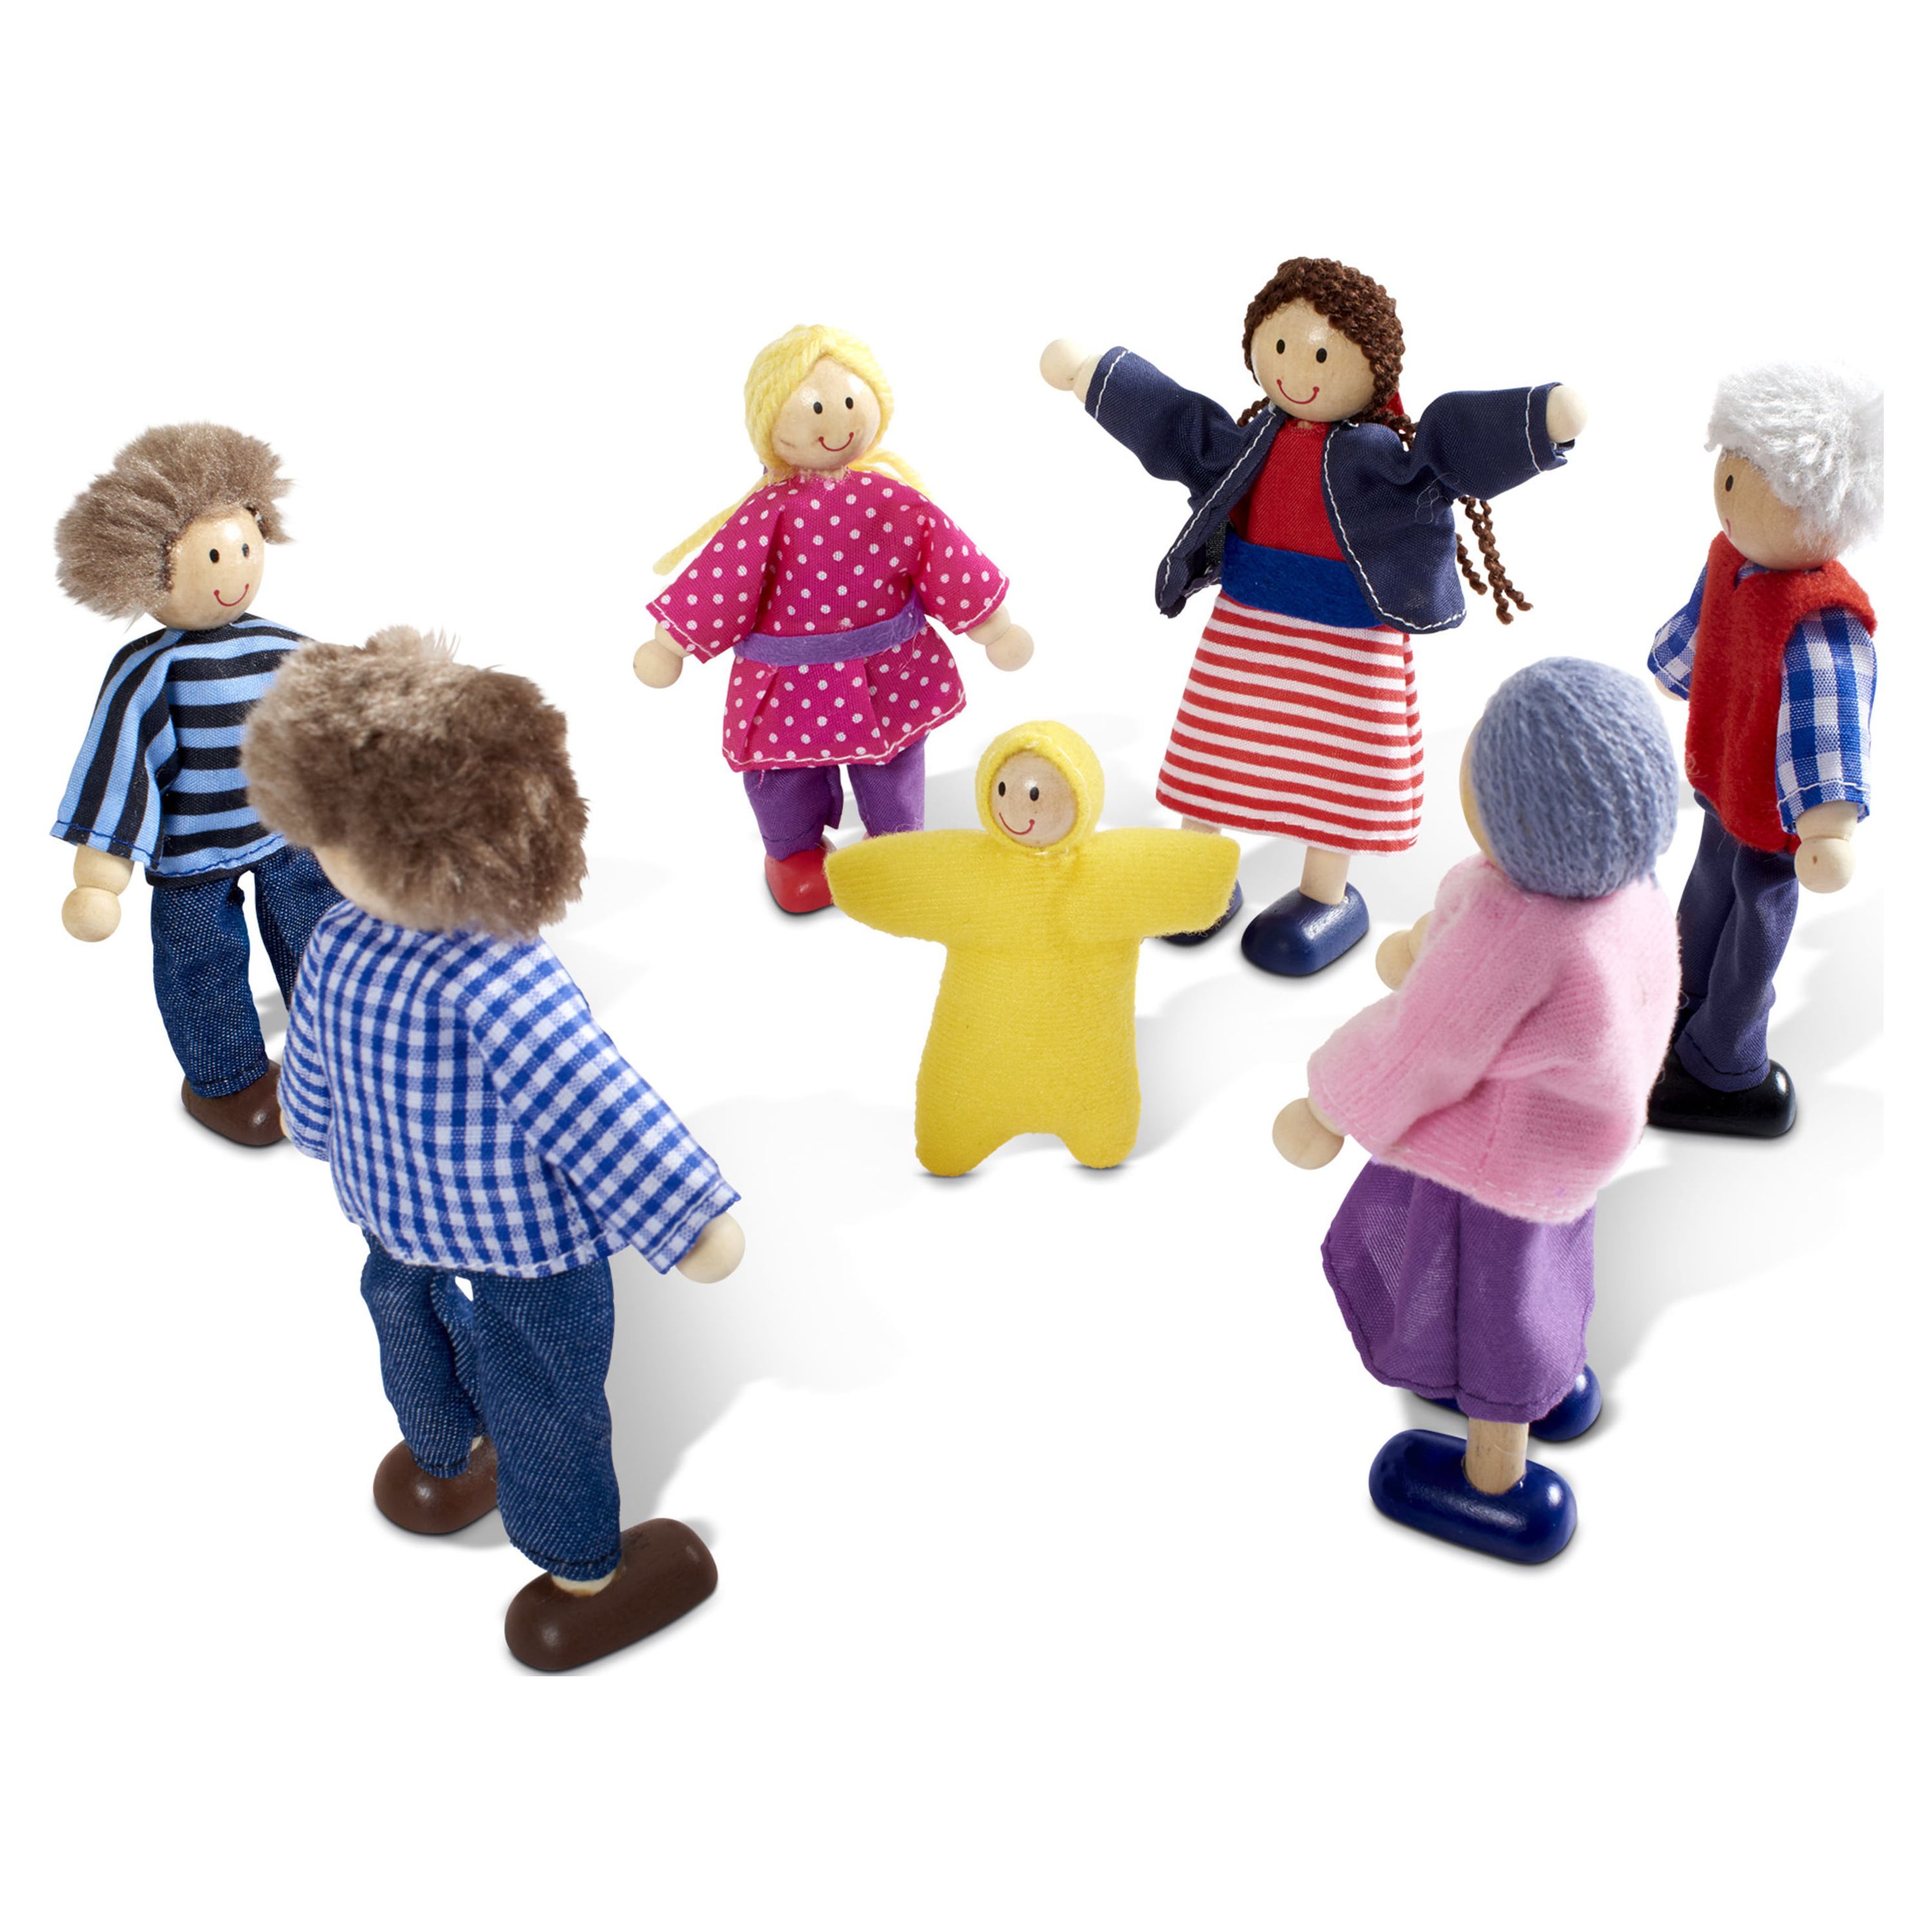 Melissa & Doug 7-Piece Poseable Wooden Doll Family for Dollhouse (2-4 inches each) - image 4 of 9